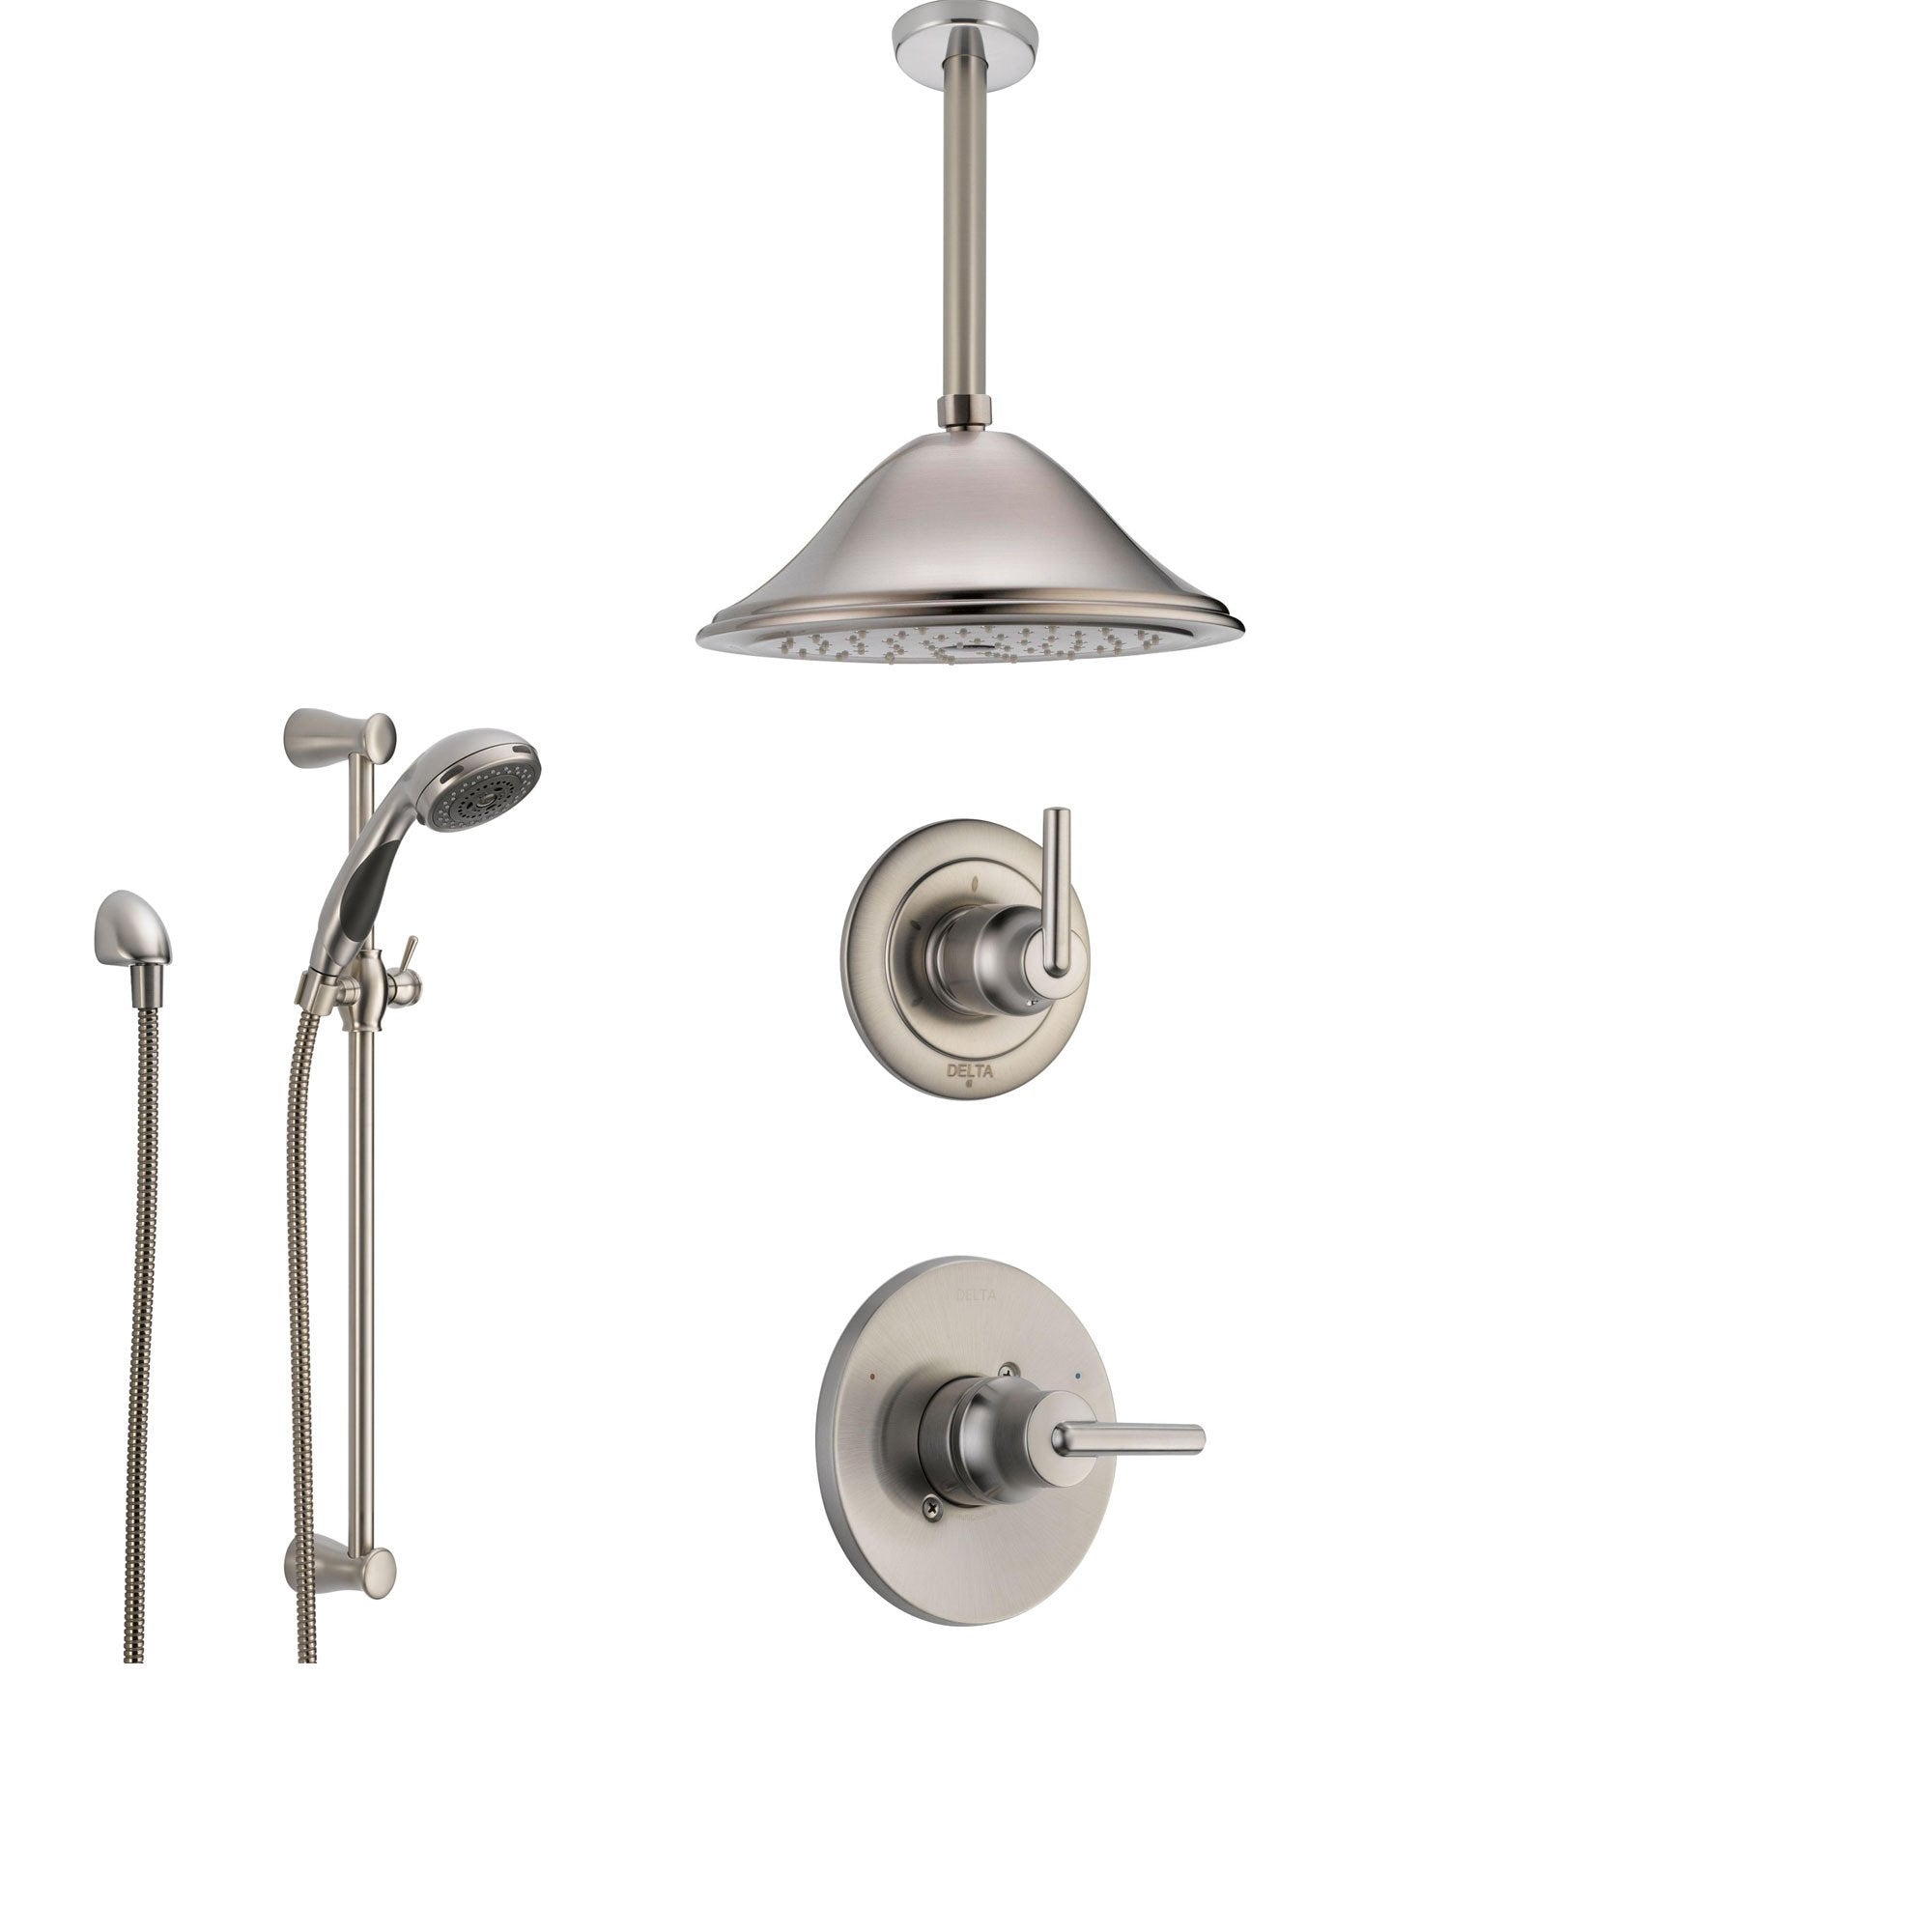 Delta Trinsic Stainless Steel Shower System with Normal Shower Handle, 3-setting Diverter, Large Ceiling Mount Showerhead, and Handheld Shower SS145982SS